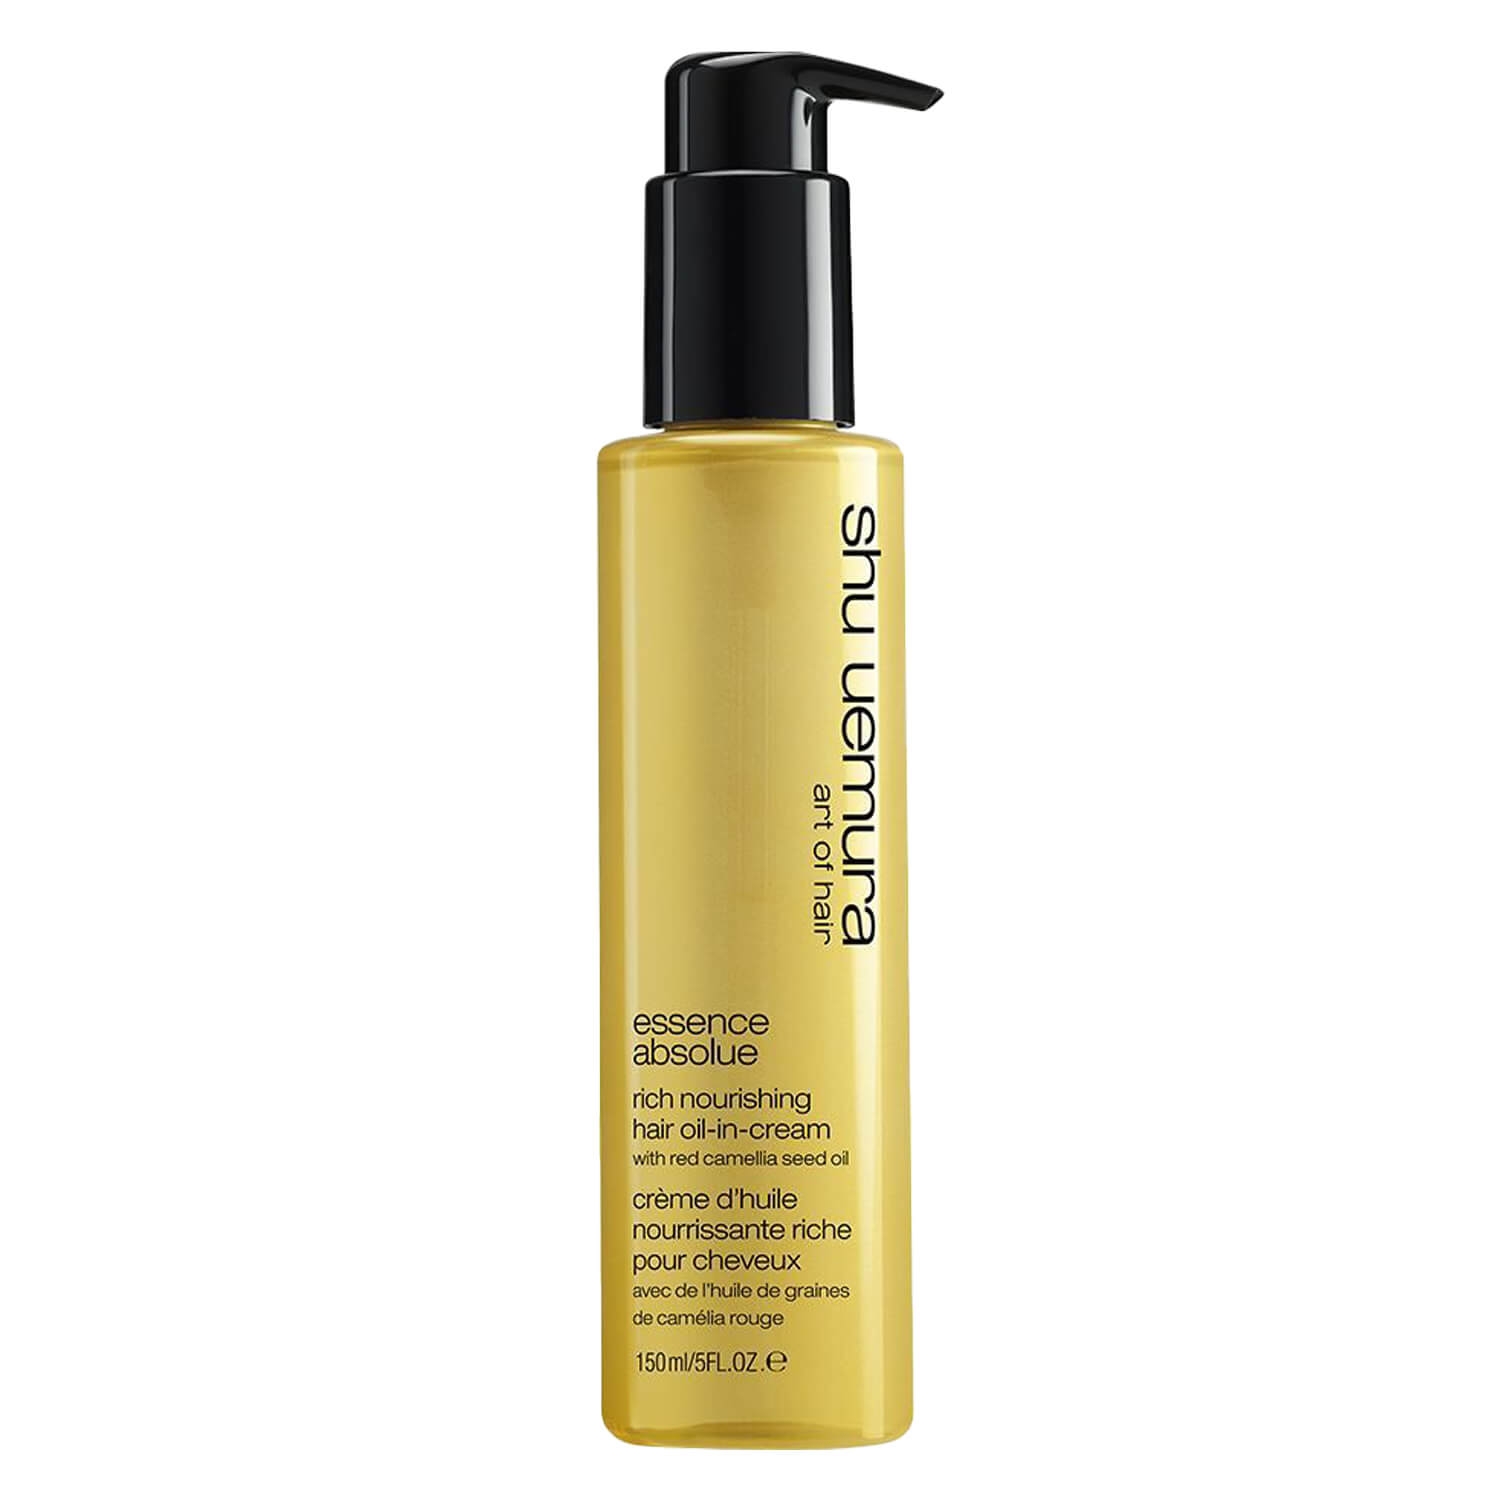 Product image from Essence Absolue - Rich Nourishing Hair Oil-In-Cream